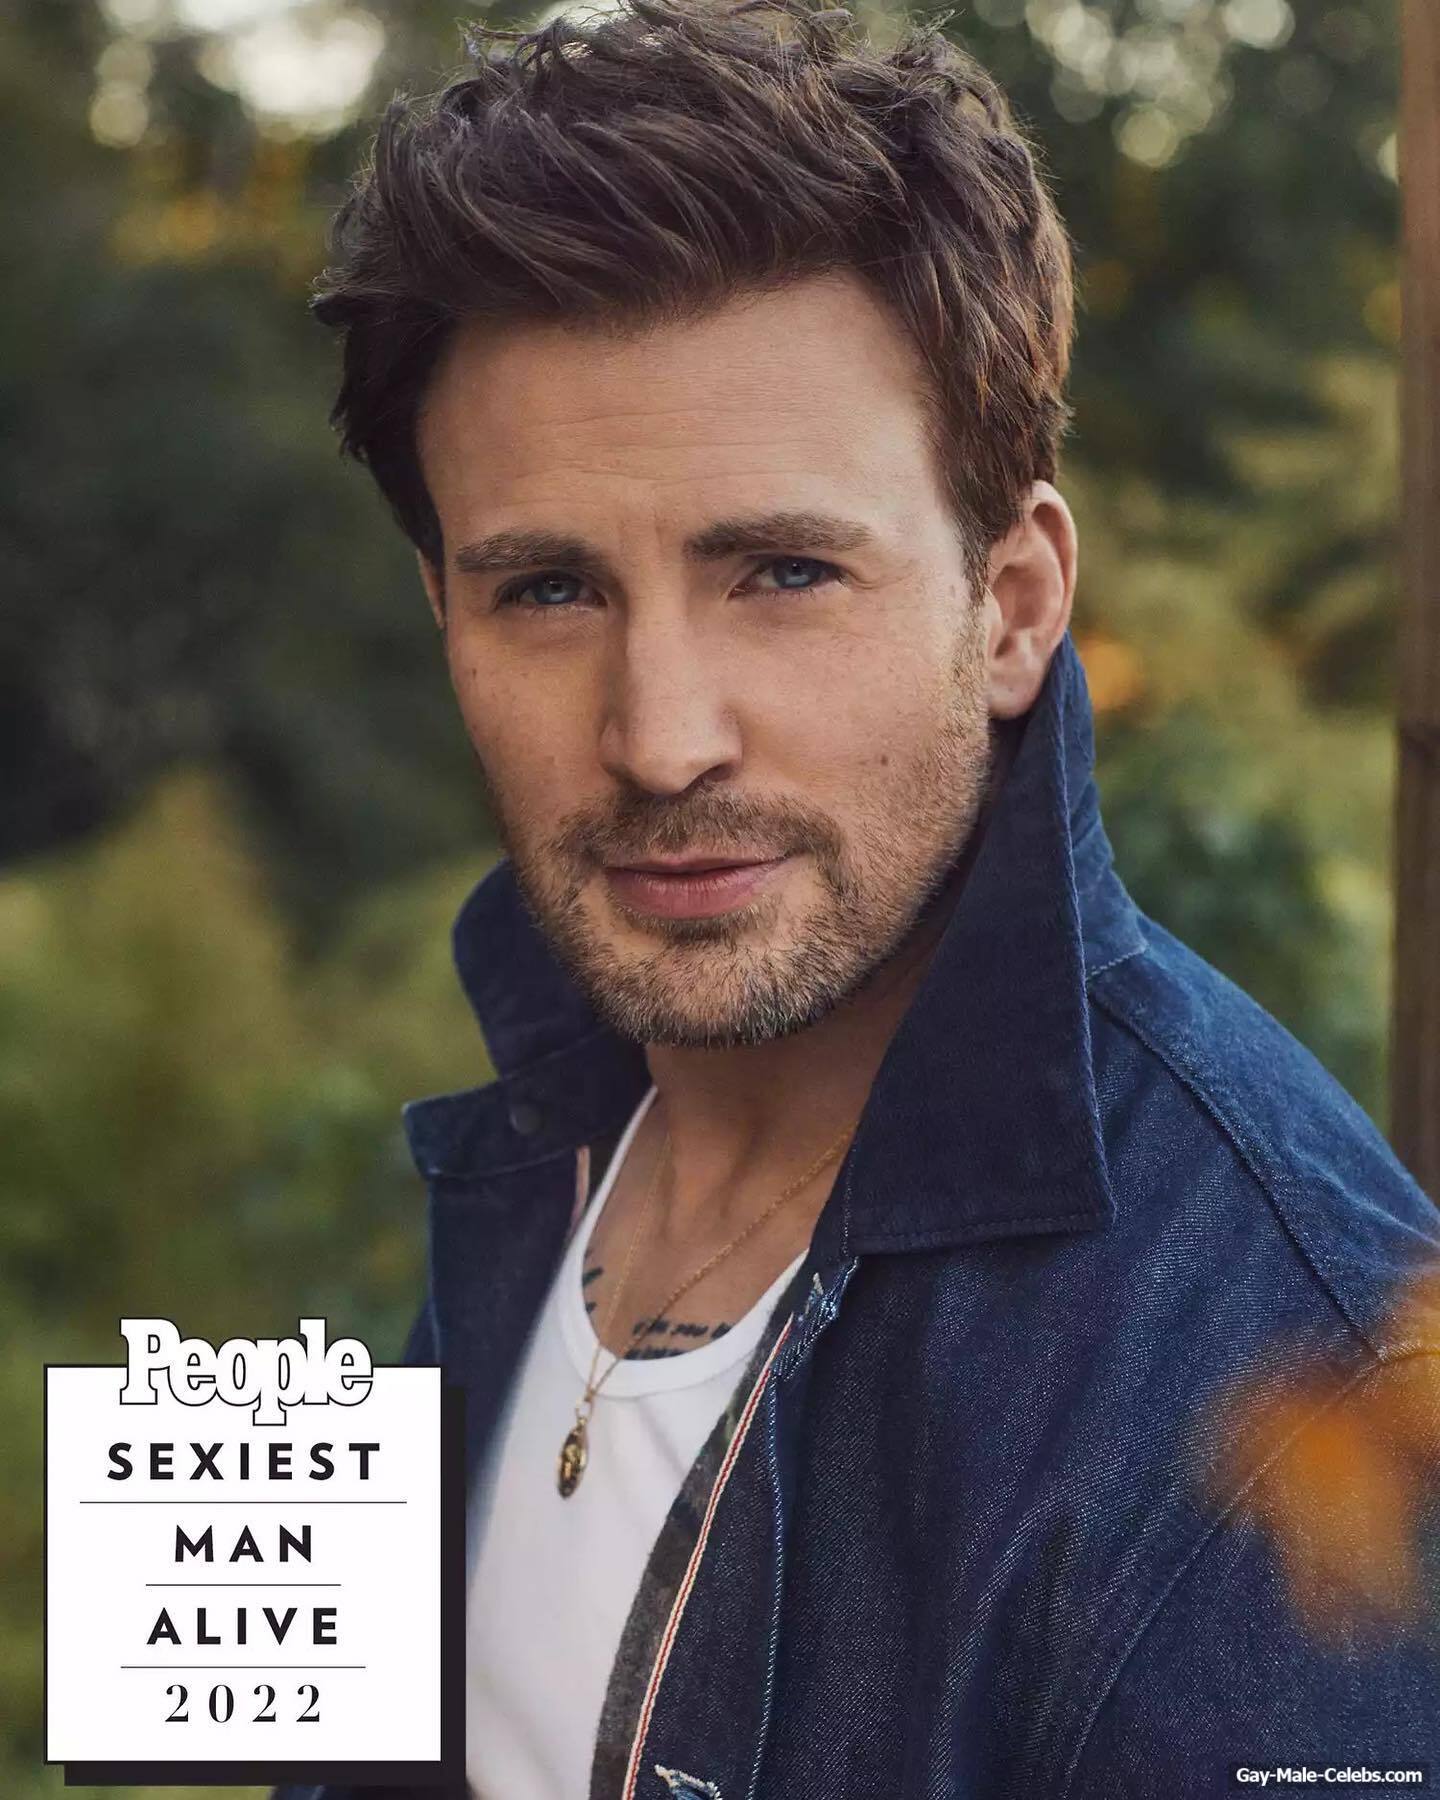 Chris Evans Looks Sexy for PEOPLE Magazine